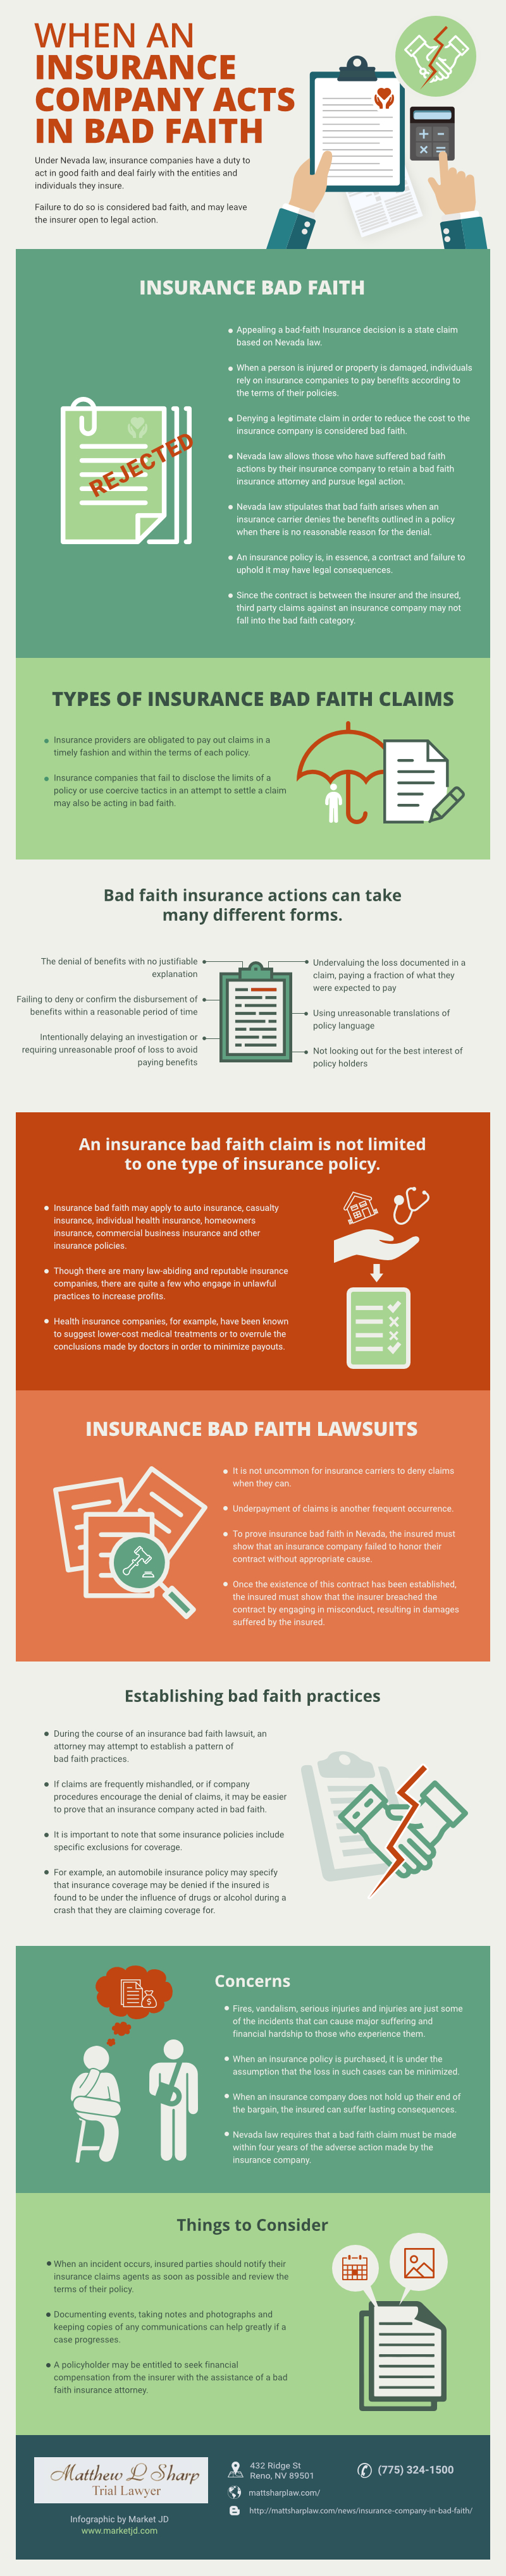 infographic_Insurance Company acts in Bad Faith